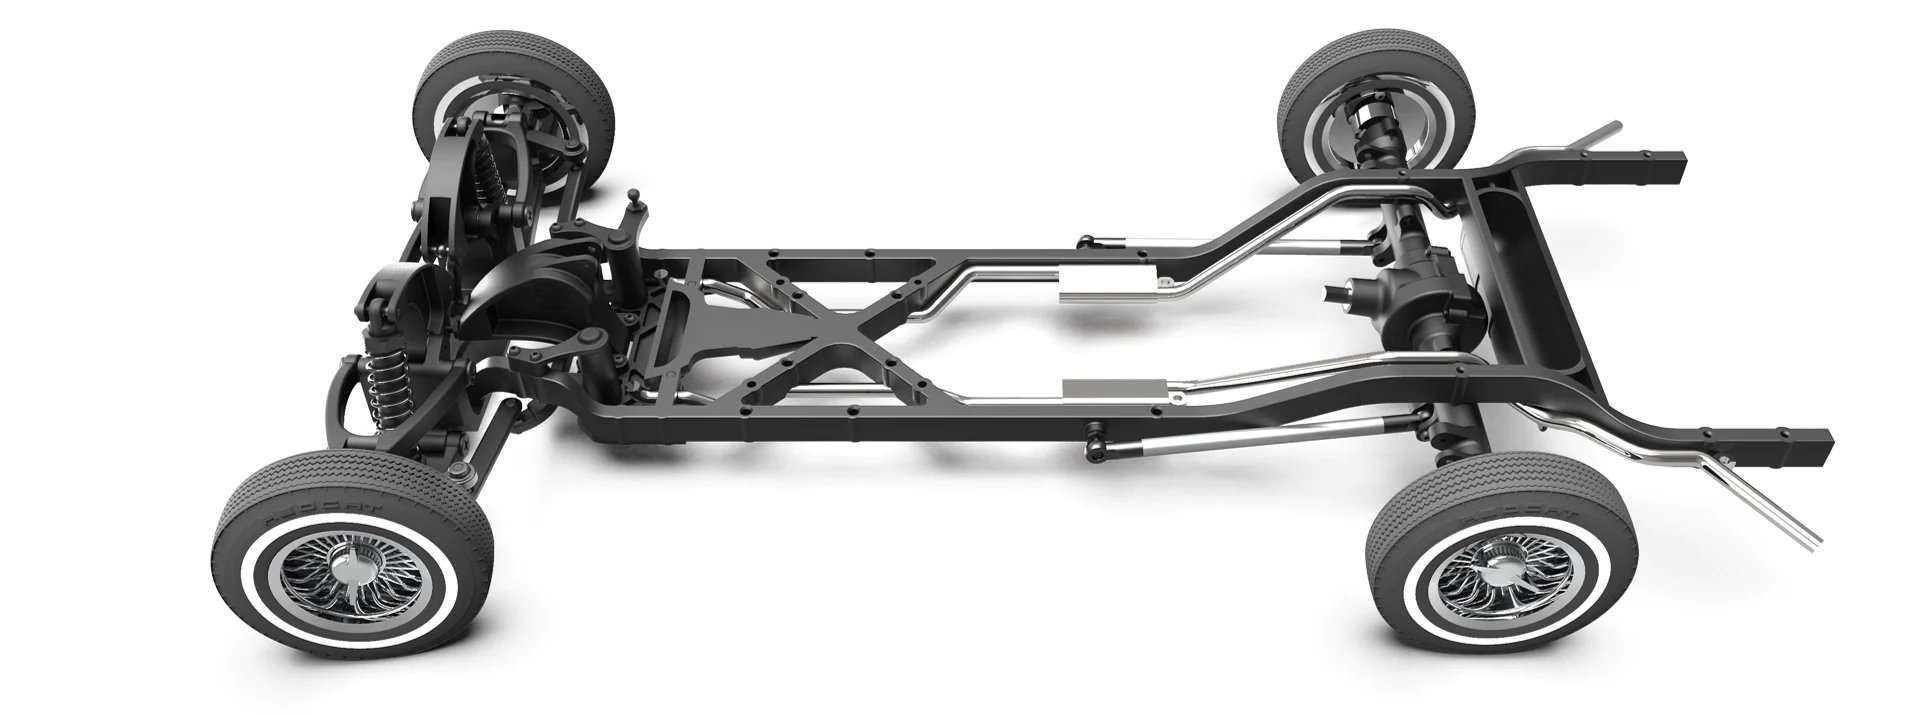 Redcat FiftyNine Impala RC Lowrider Chassis For Sale TeamRedcatShop.com